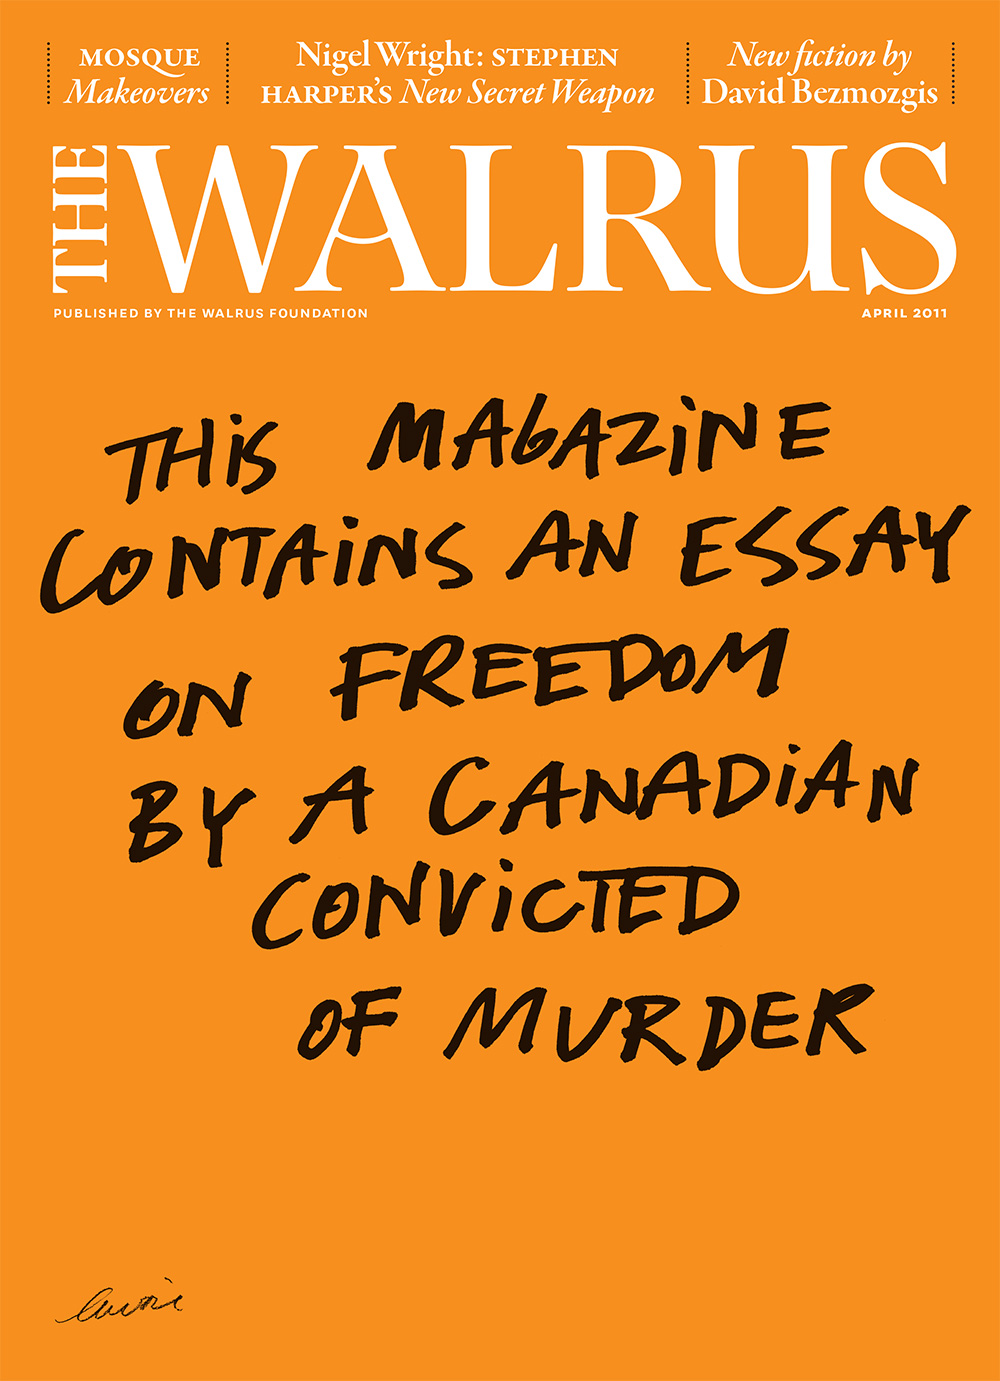 Cover of The Walrus magazine featuring black writing on a bright orange background. The Walrus wordmark is in white at the top and text reads 'This magazine contains an essay on freedom by a Canadian convicted of murder.'